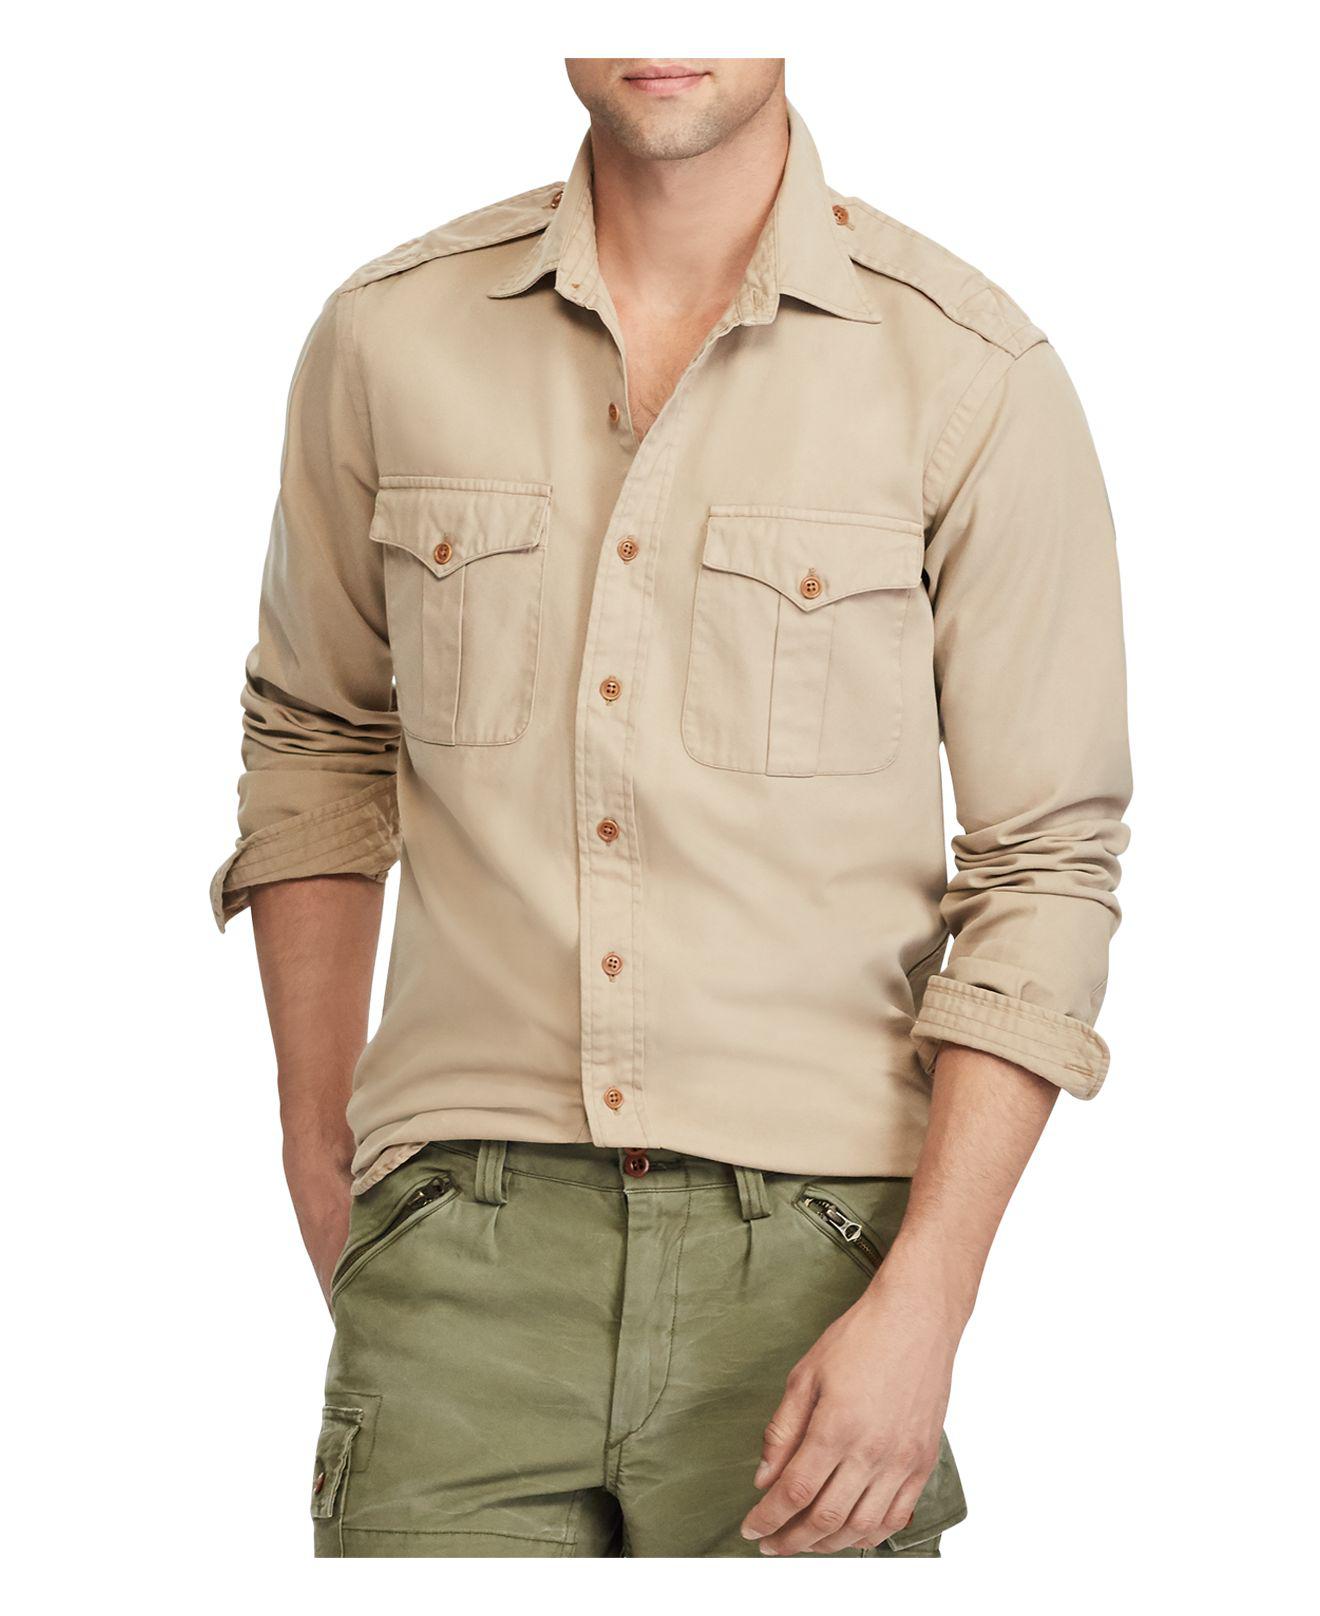 Polo Ralph Lauren Wool Military Chino Shirt in Vintage Camel (Natural) for  Men - Lyst